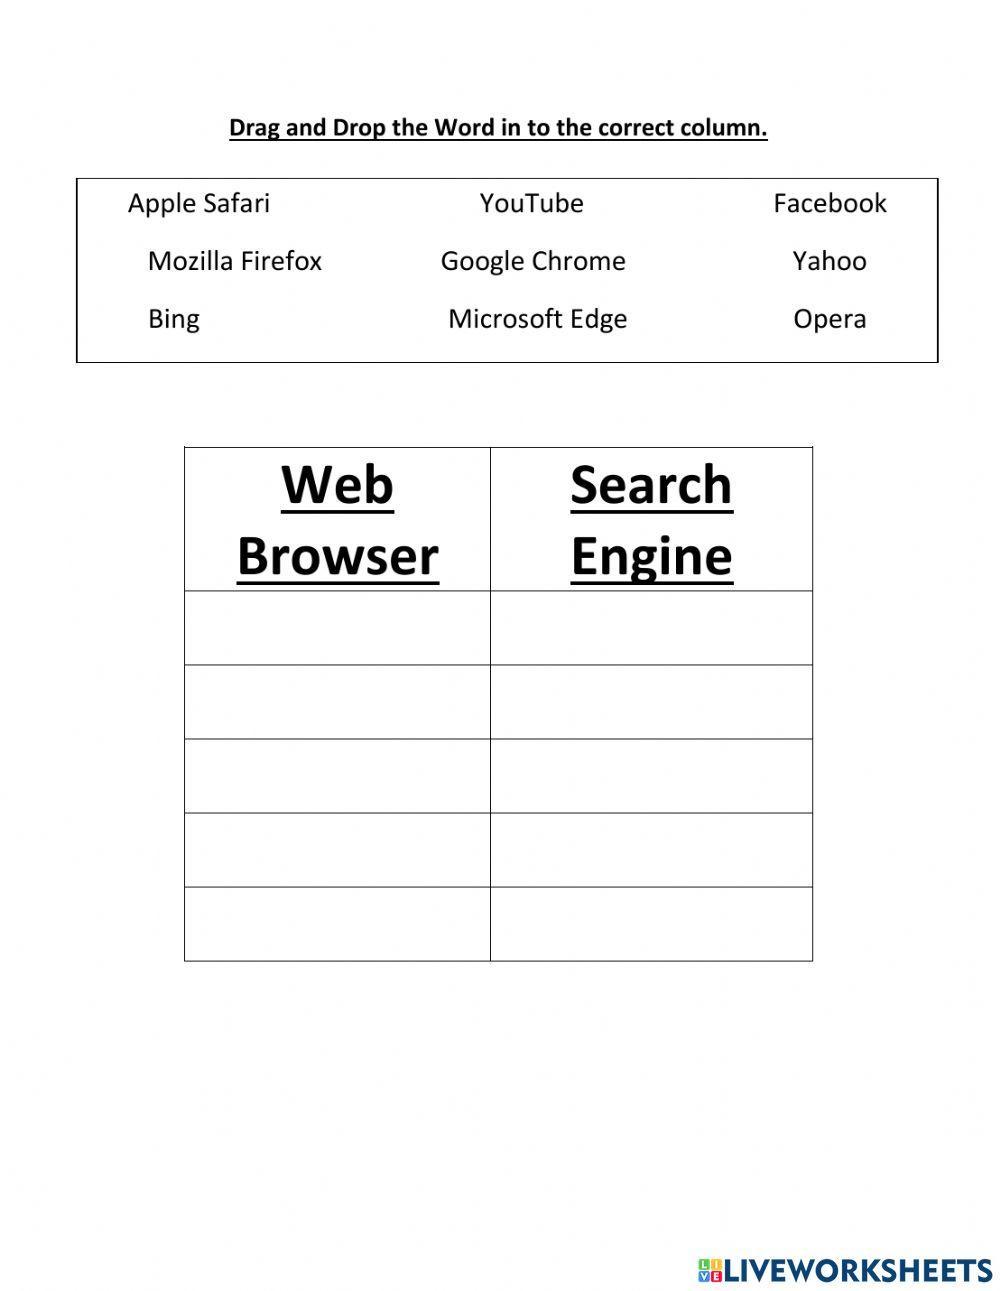 Web Browser and Search Engine